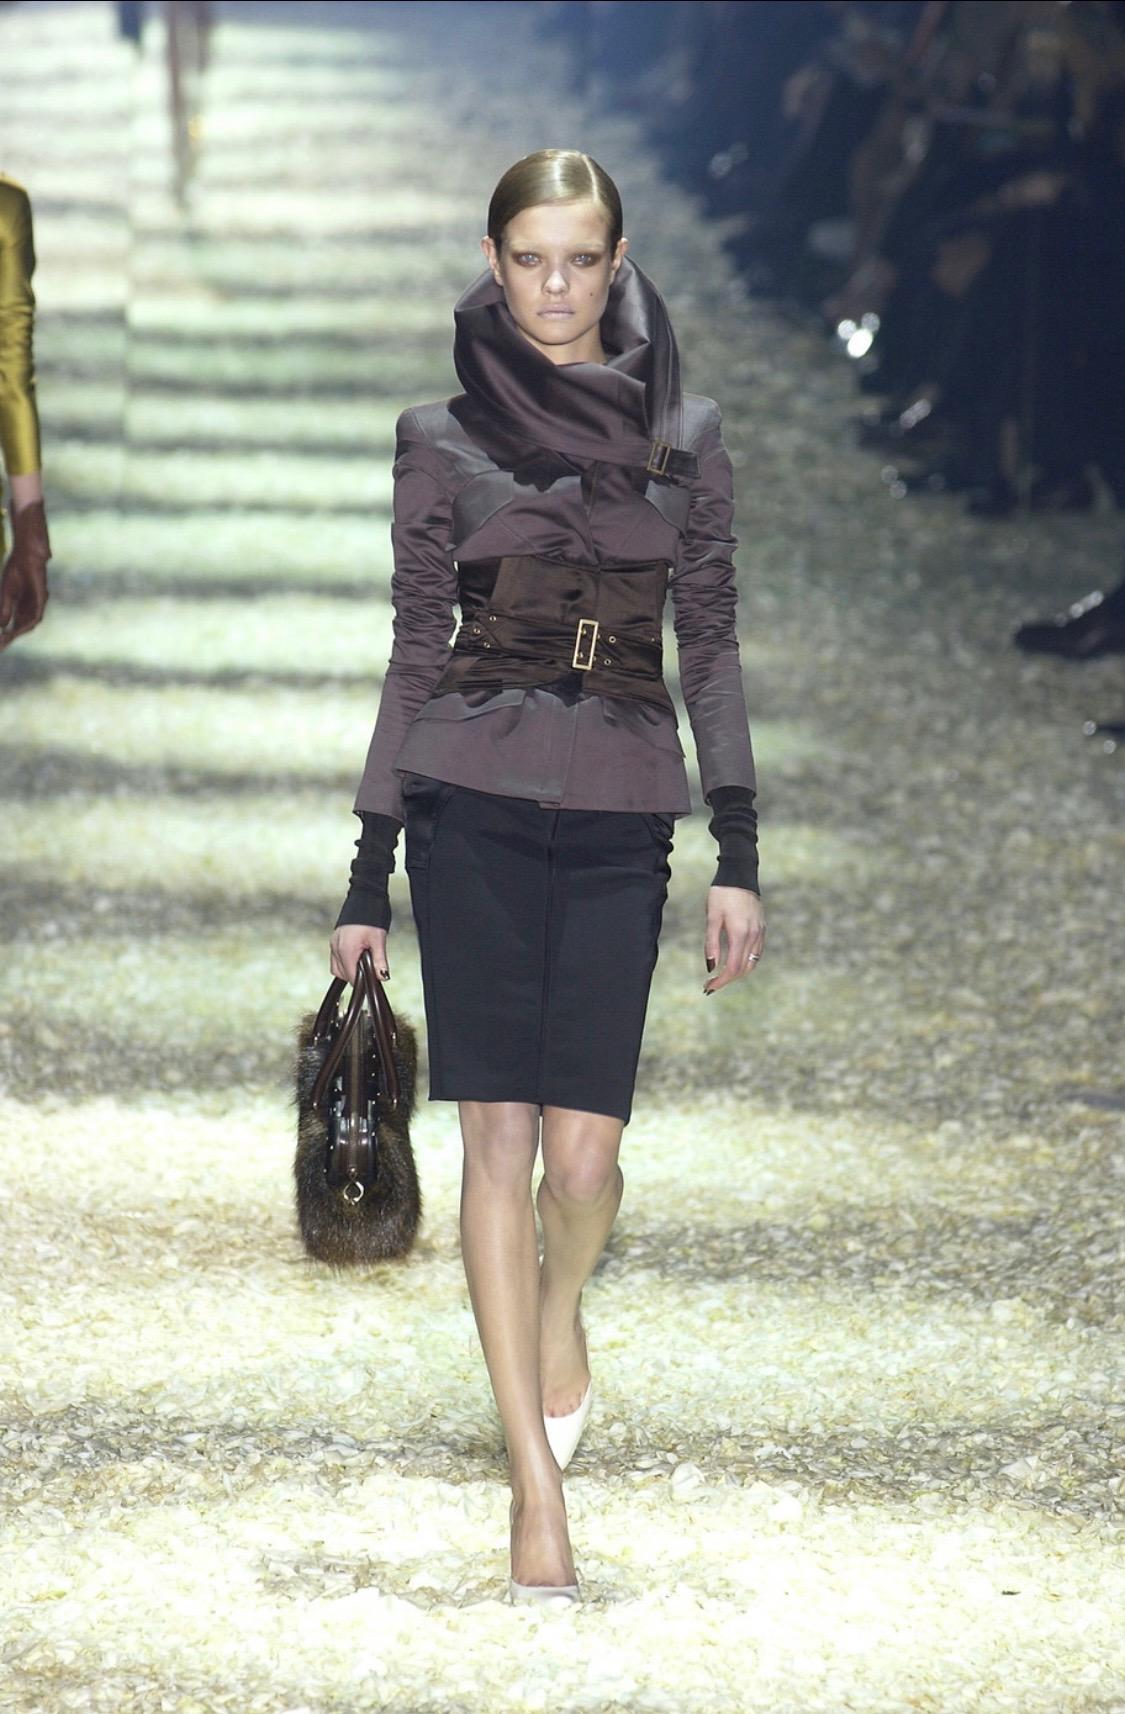 Presenting a stretch black satin Gucci skirt, designed by Tom Ford. From the Fall/Winter 2003 collection, this beautiful skirt features zippers on either hip and paneling which enhances the curves of the female form. This skirt debuted on the runway